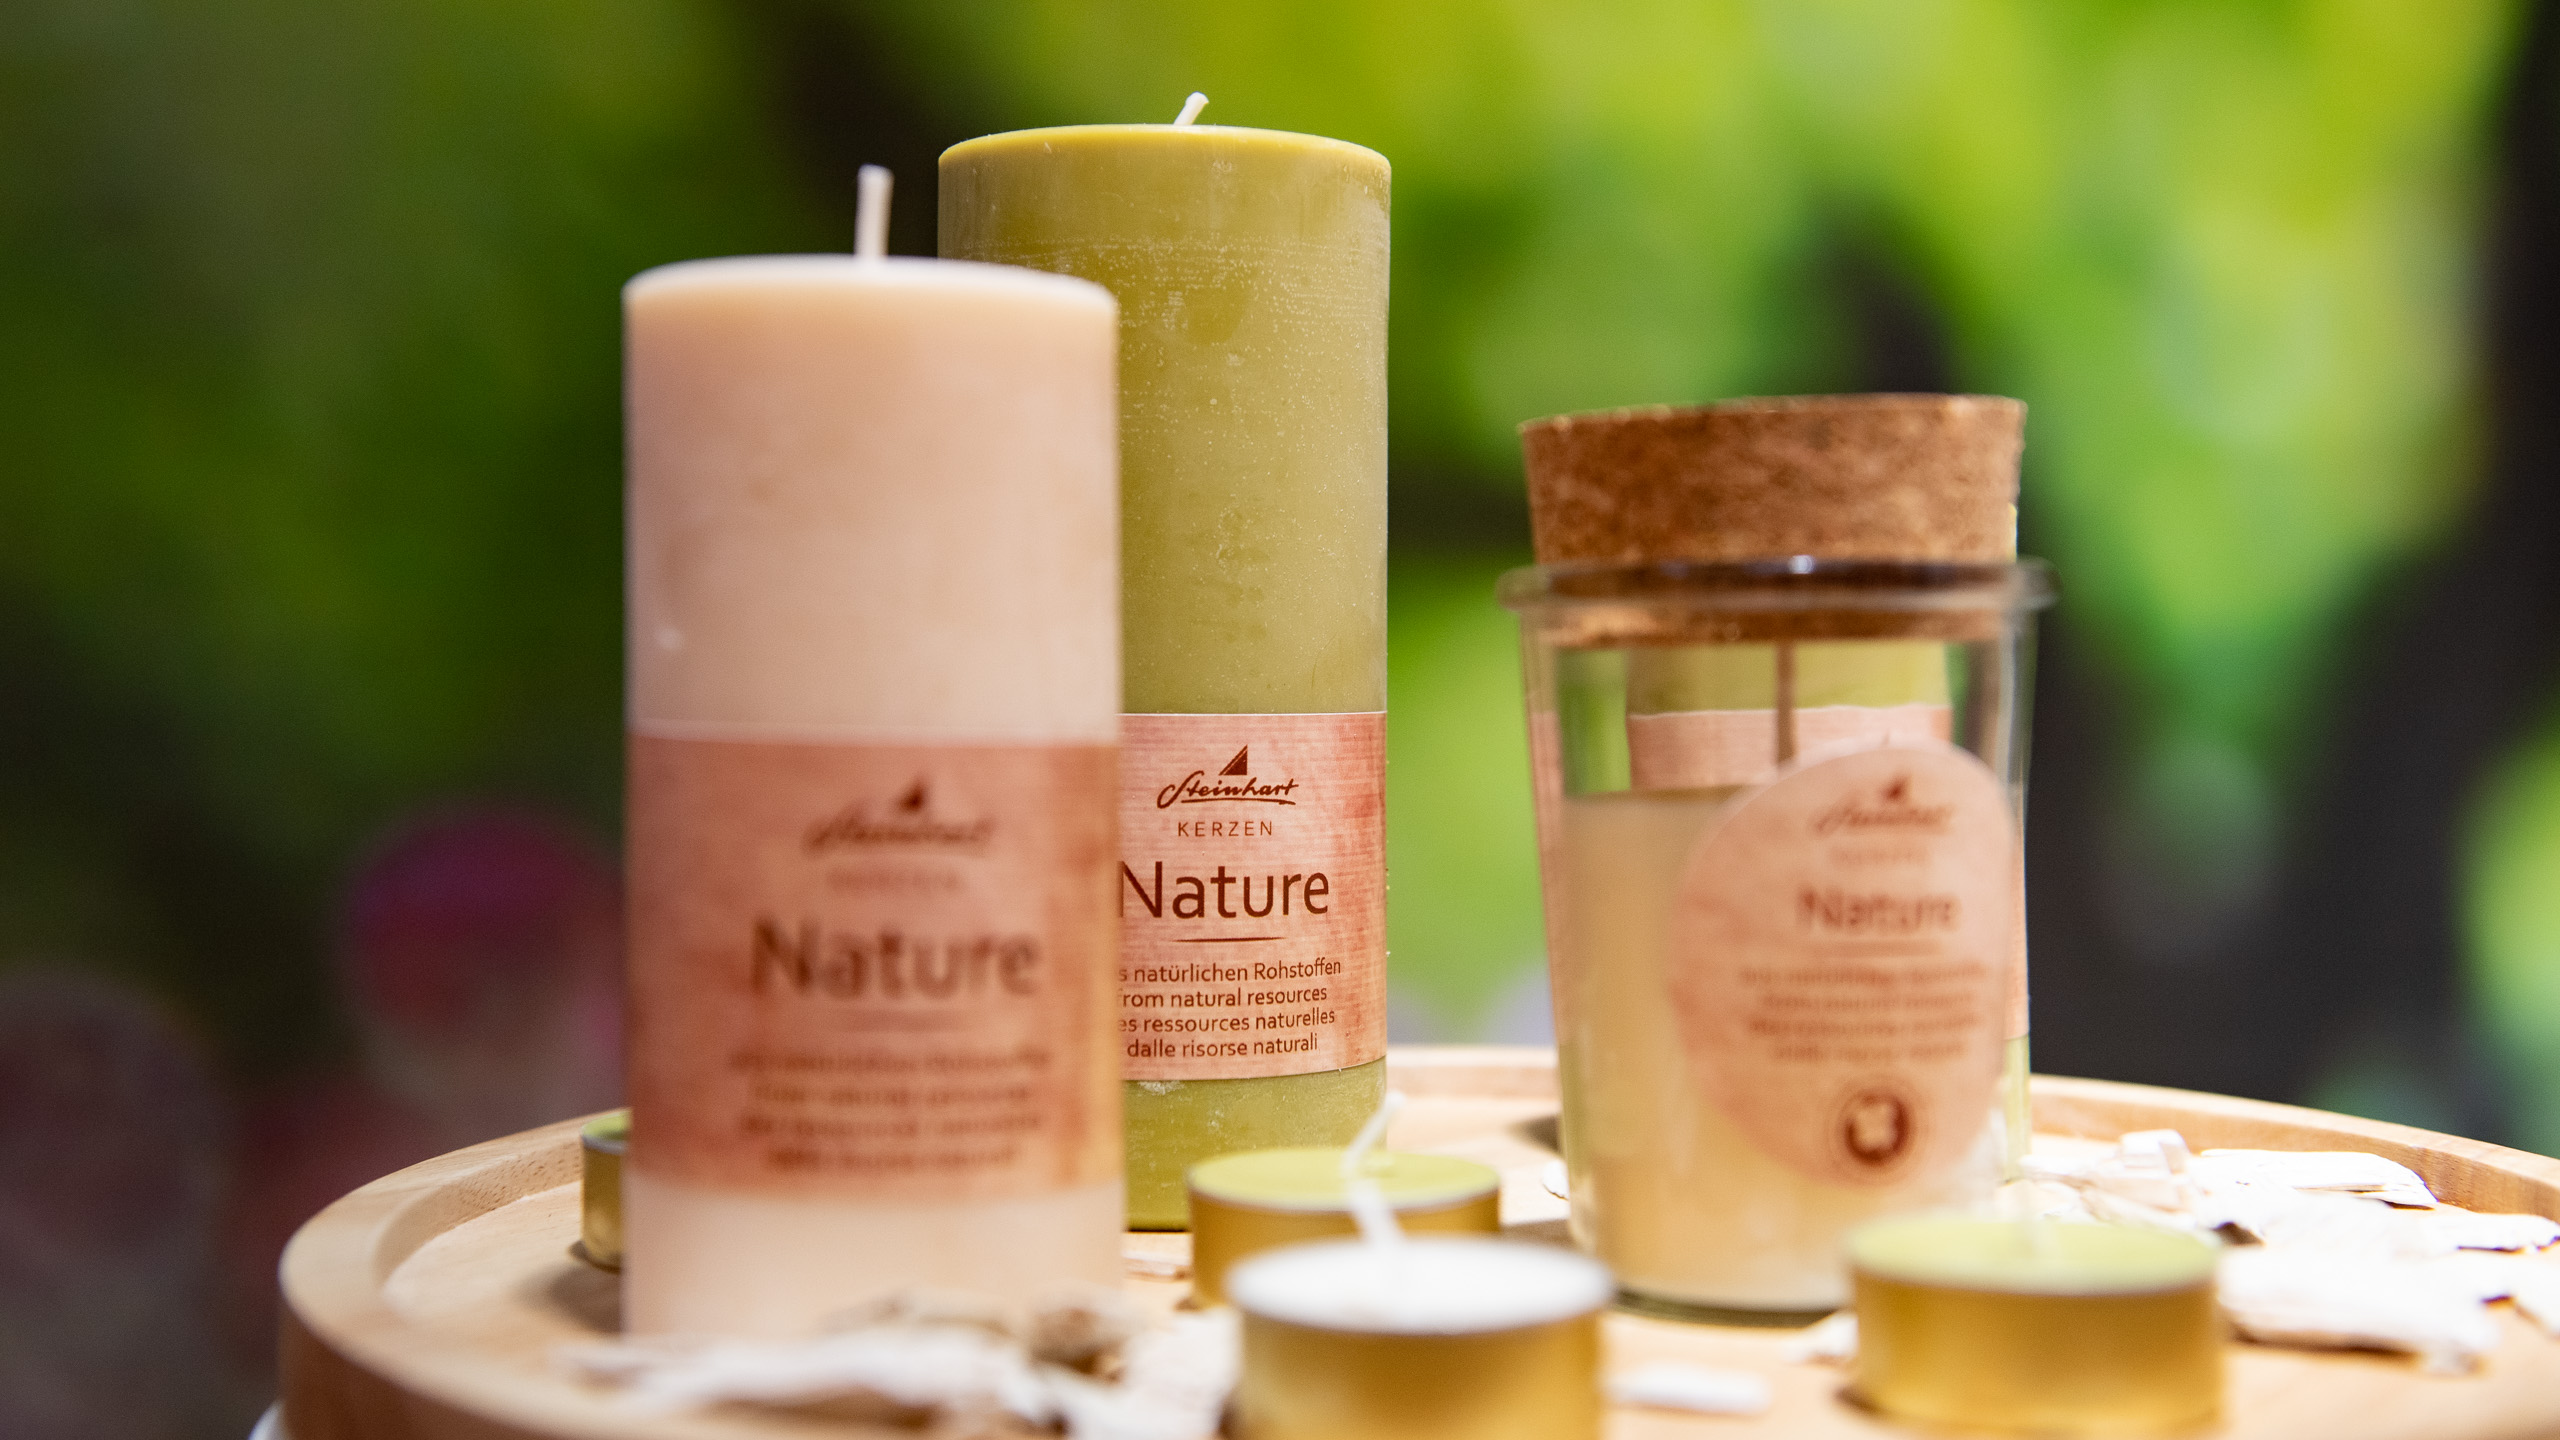 The candles from Gebr. Steinhart's Nature line are made from natural renewable raw materials such as rapeseed wax. Photo: Messe Frankfurt/Pietro Sutera